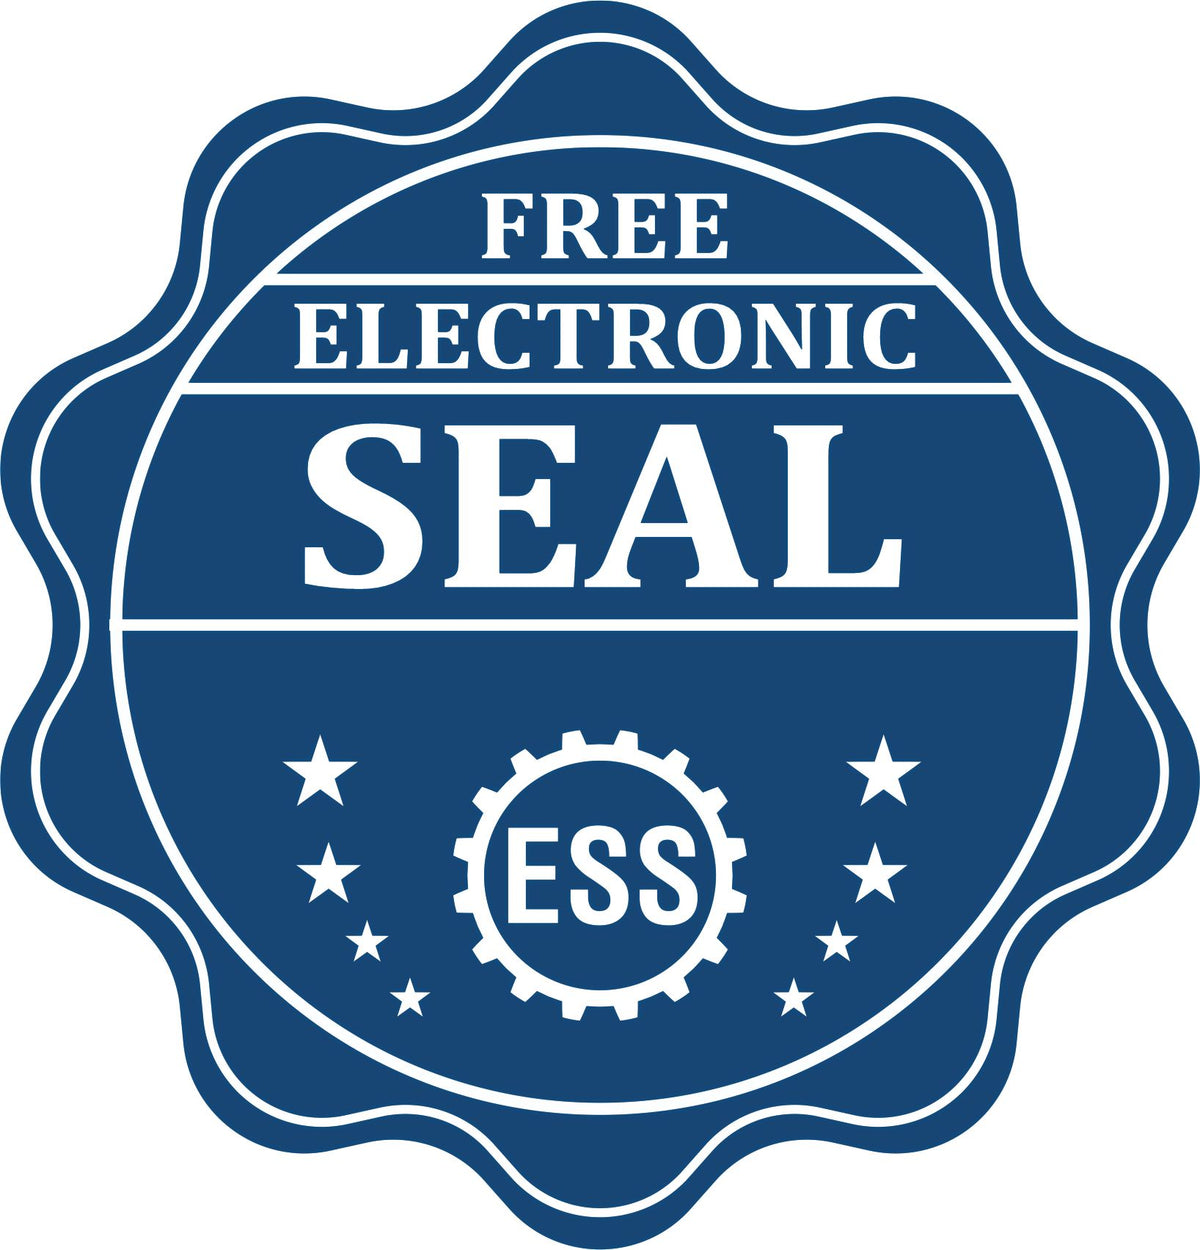 A badge showing a free electronic seal for the Florida Desk Surveyor Seal Embosser with stars and the ESS gear on the emblem.